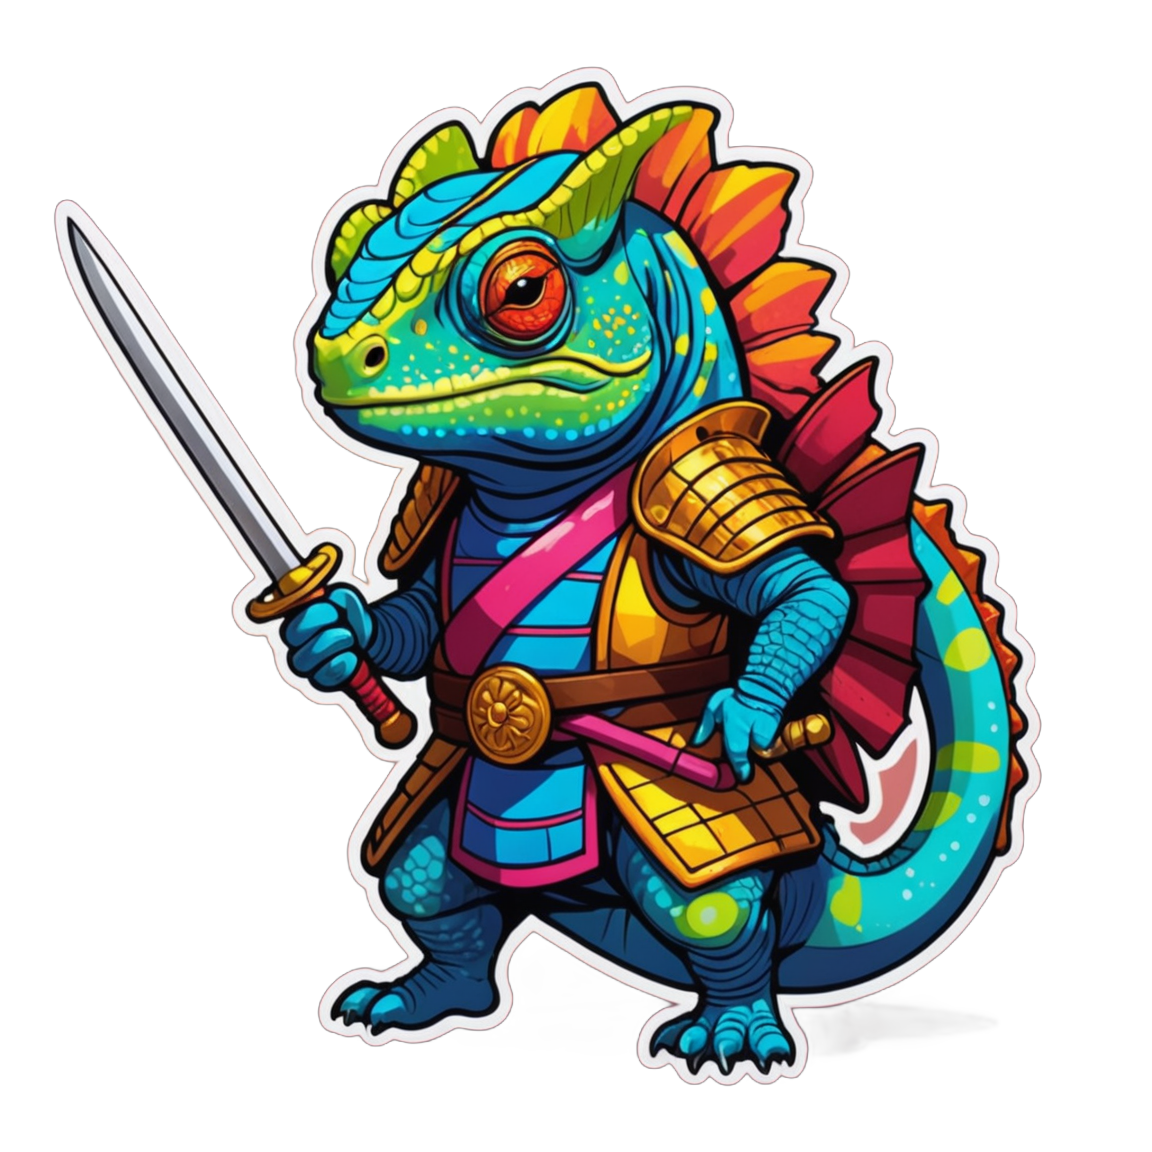 A chameleon dressed as a samurai warrior, vivid and colorful armor blending with a spectrum of bright hues